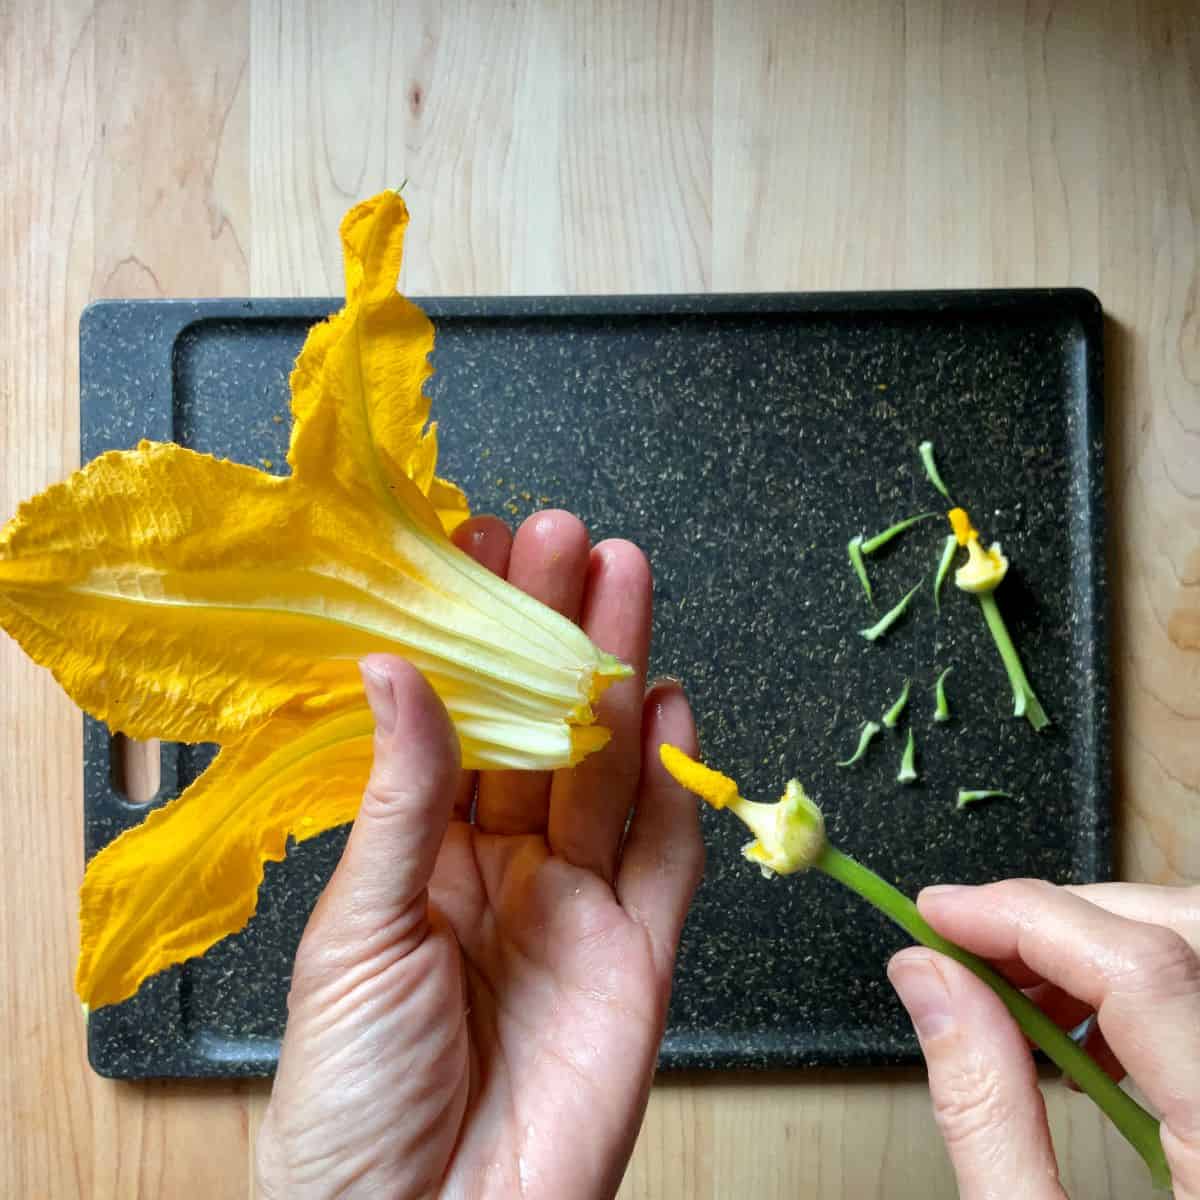 Removing the pistil from a zucchini flower.